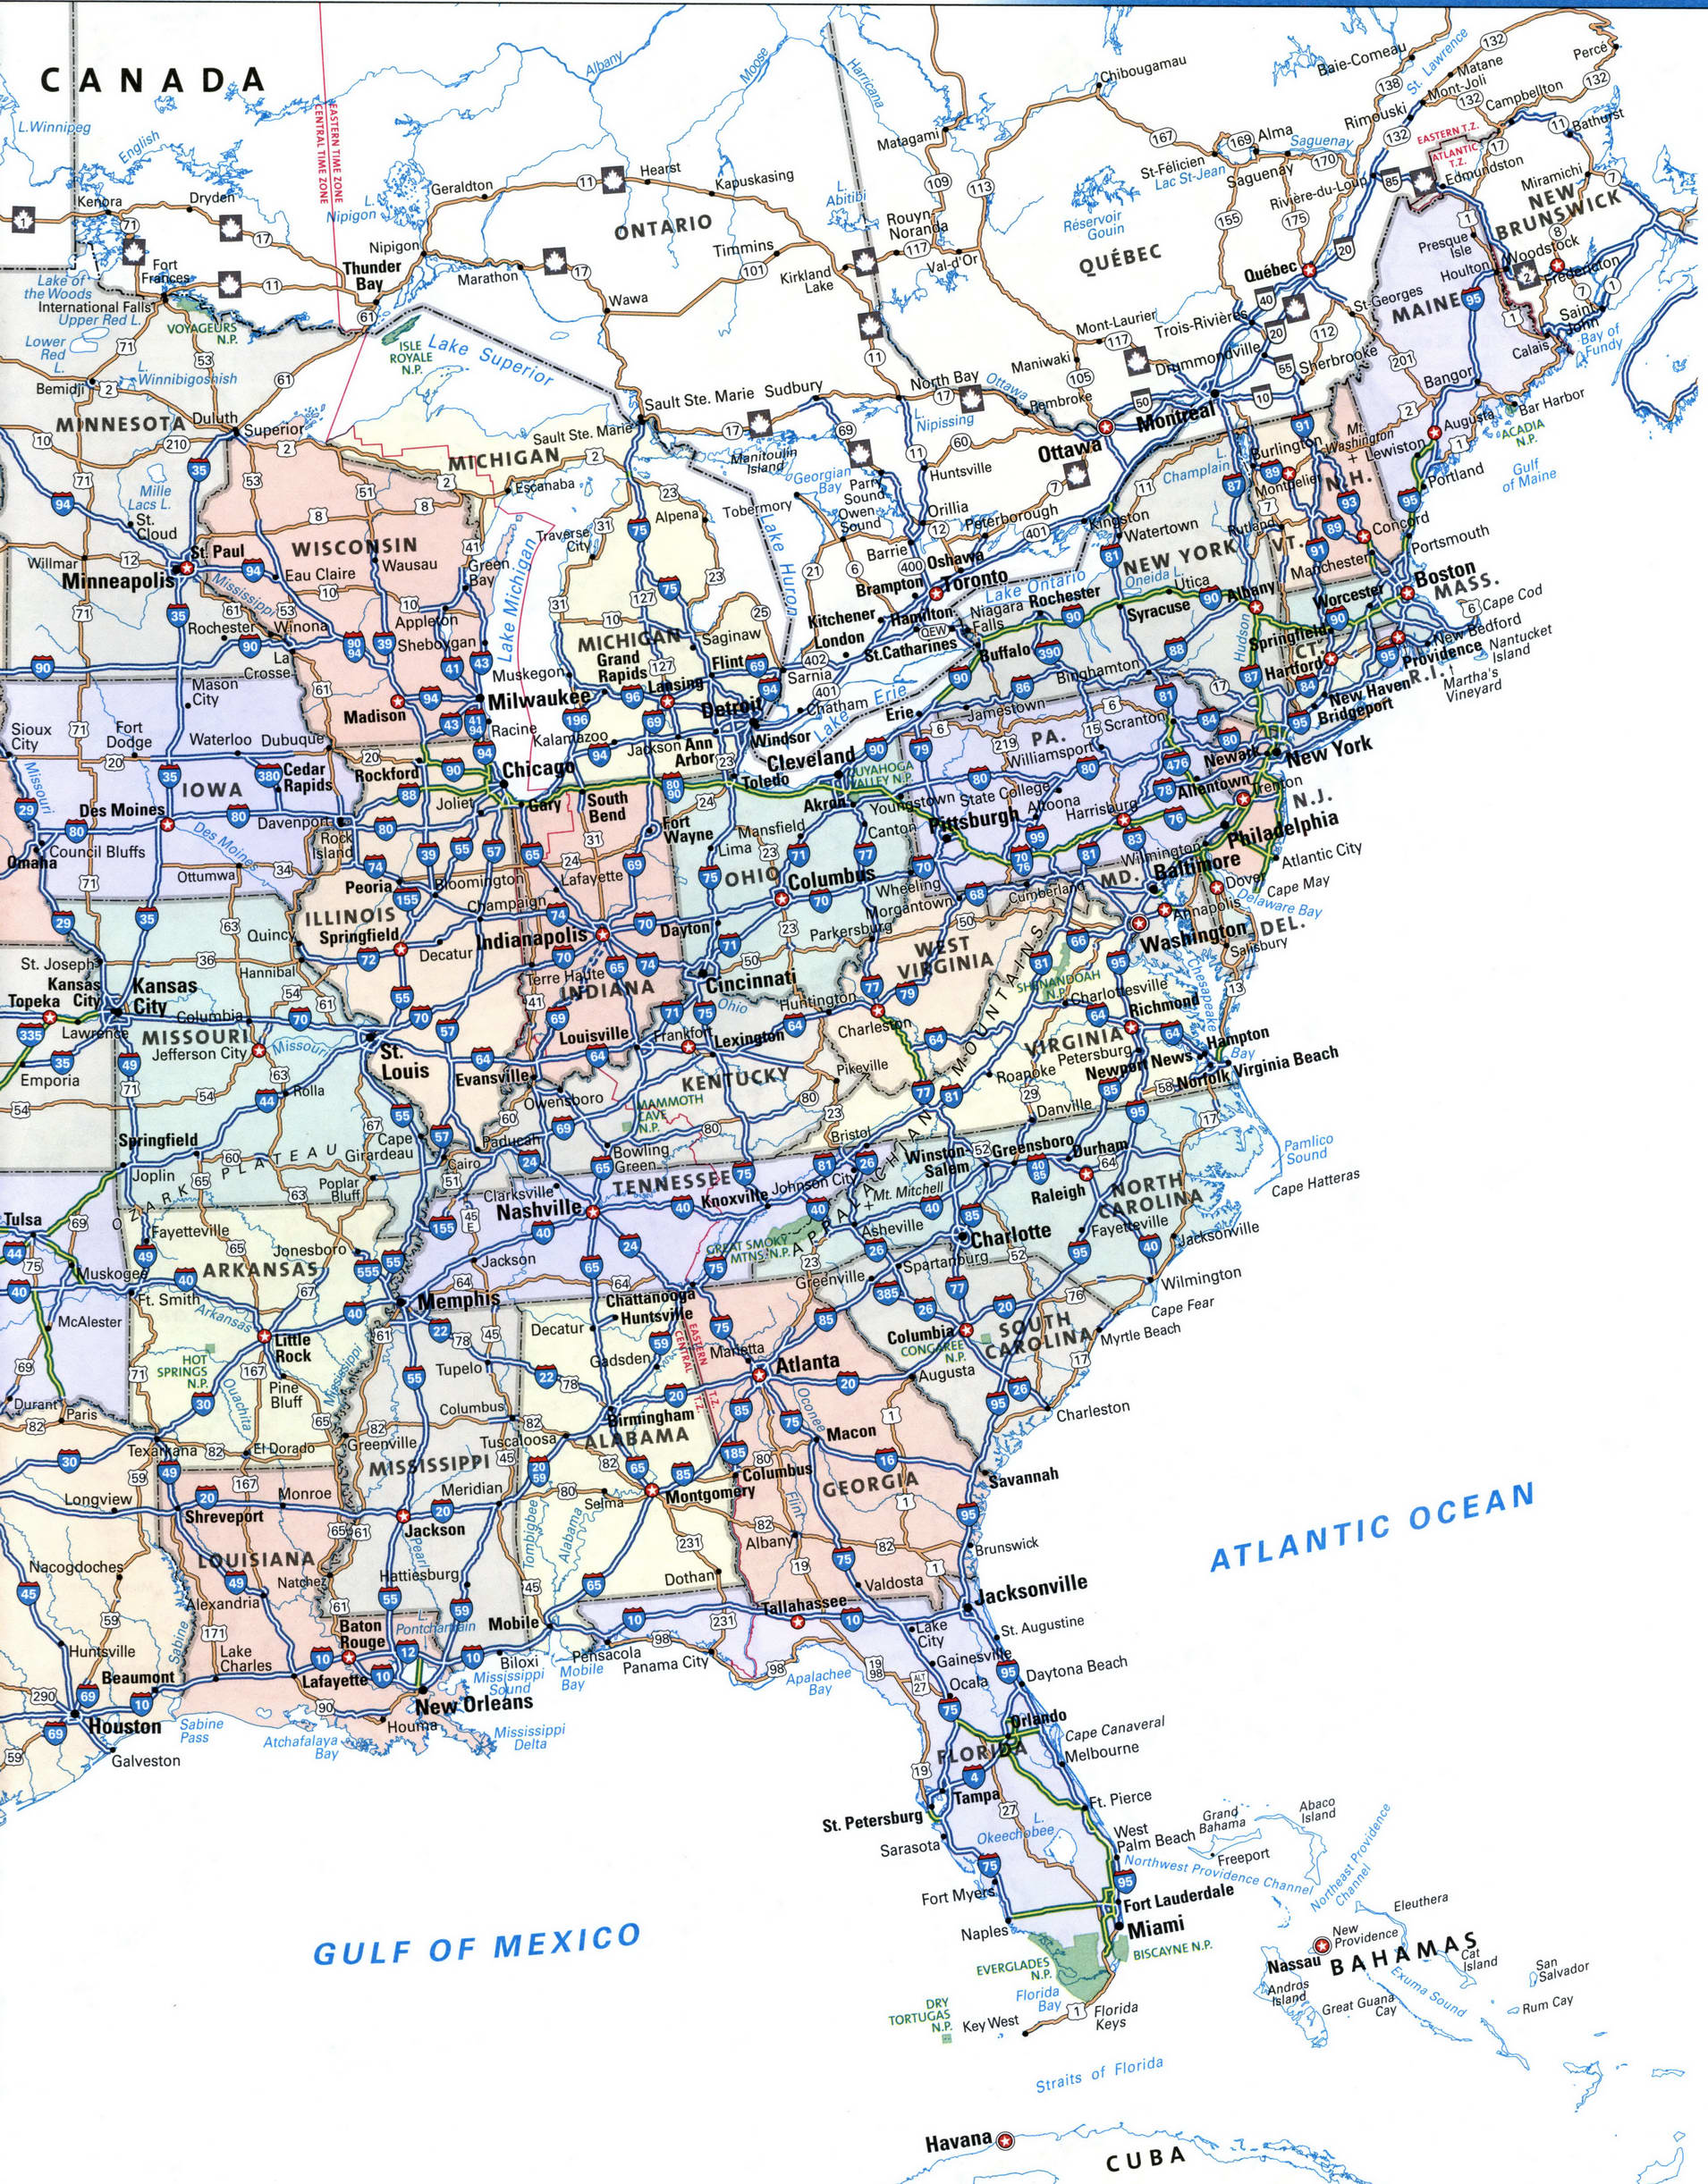 Eastern United States interstate map